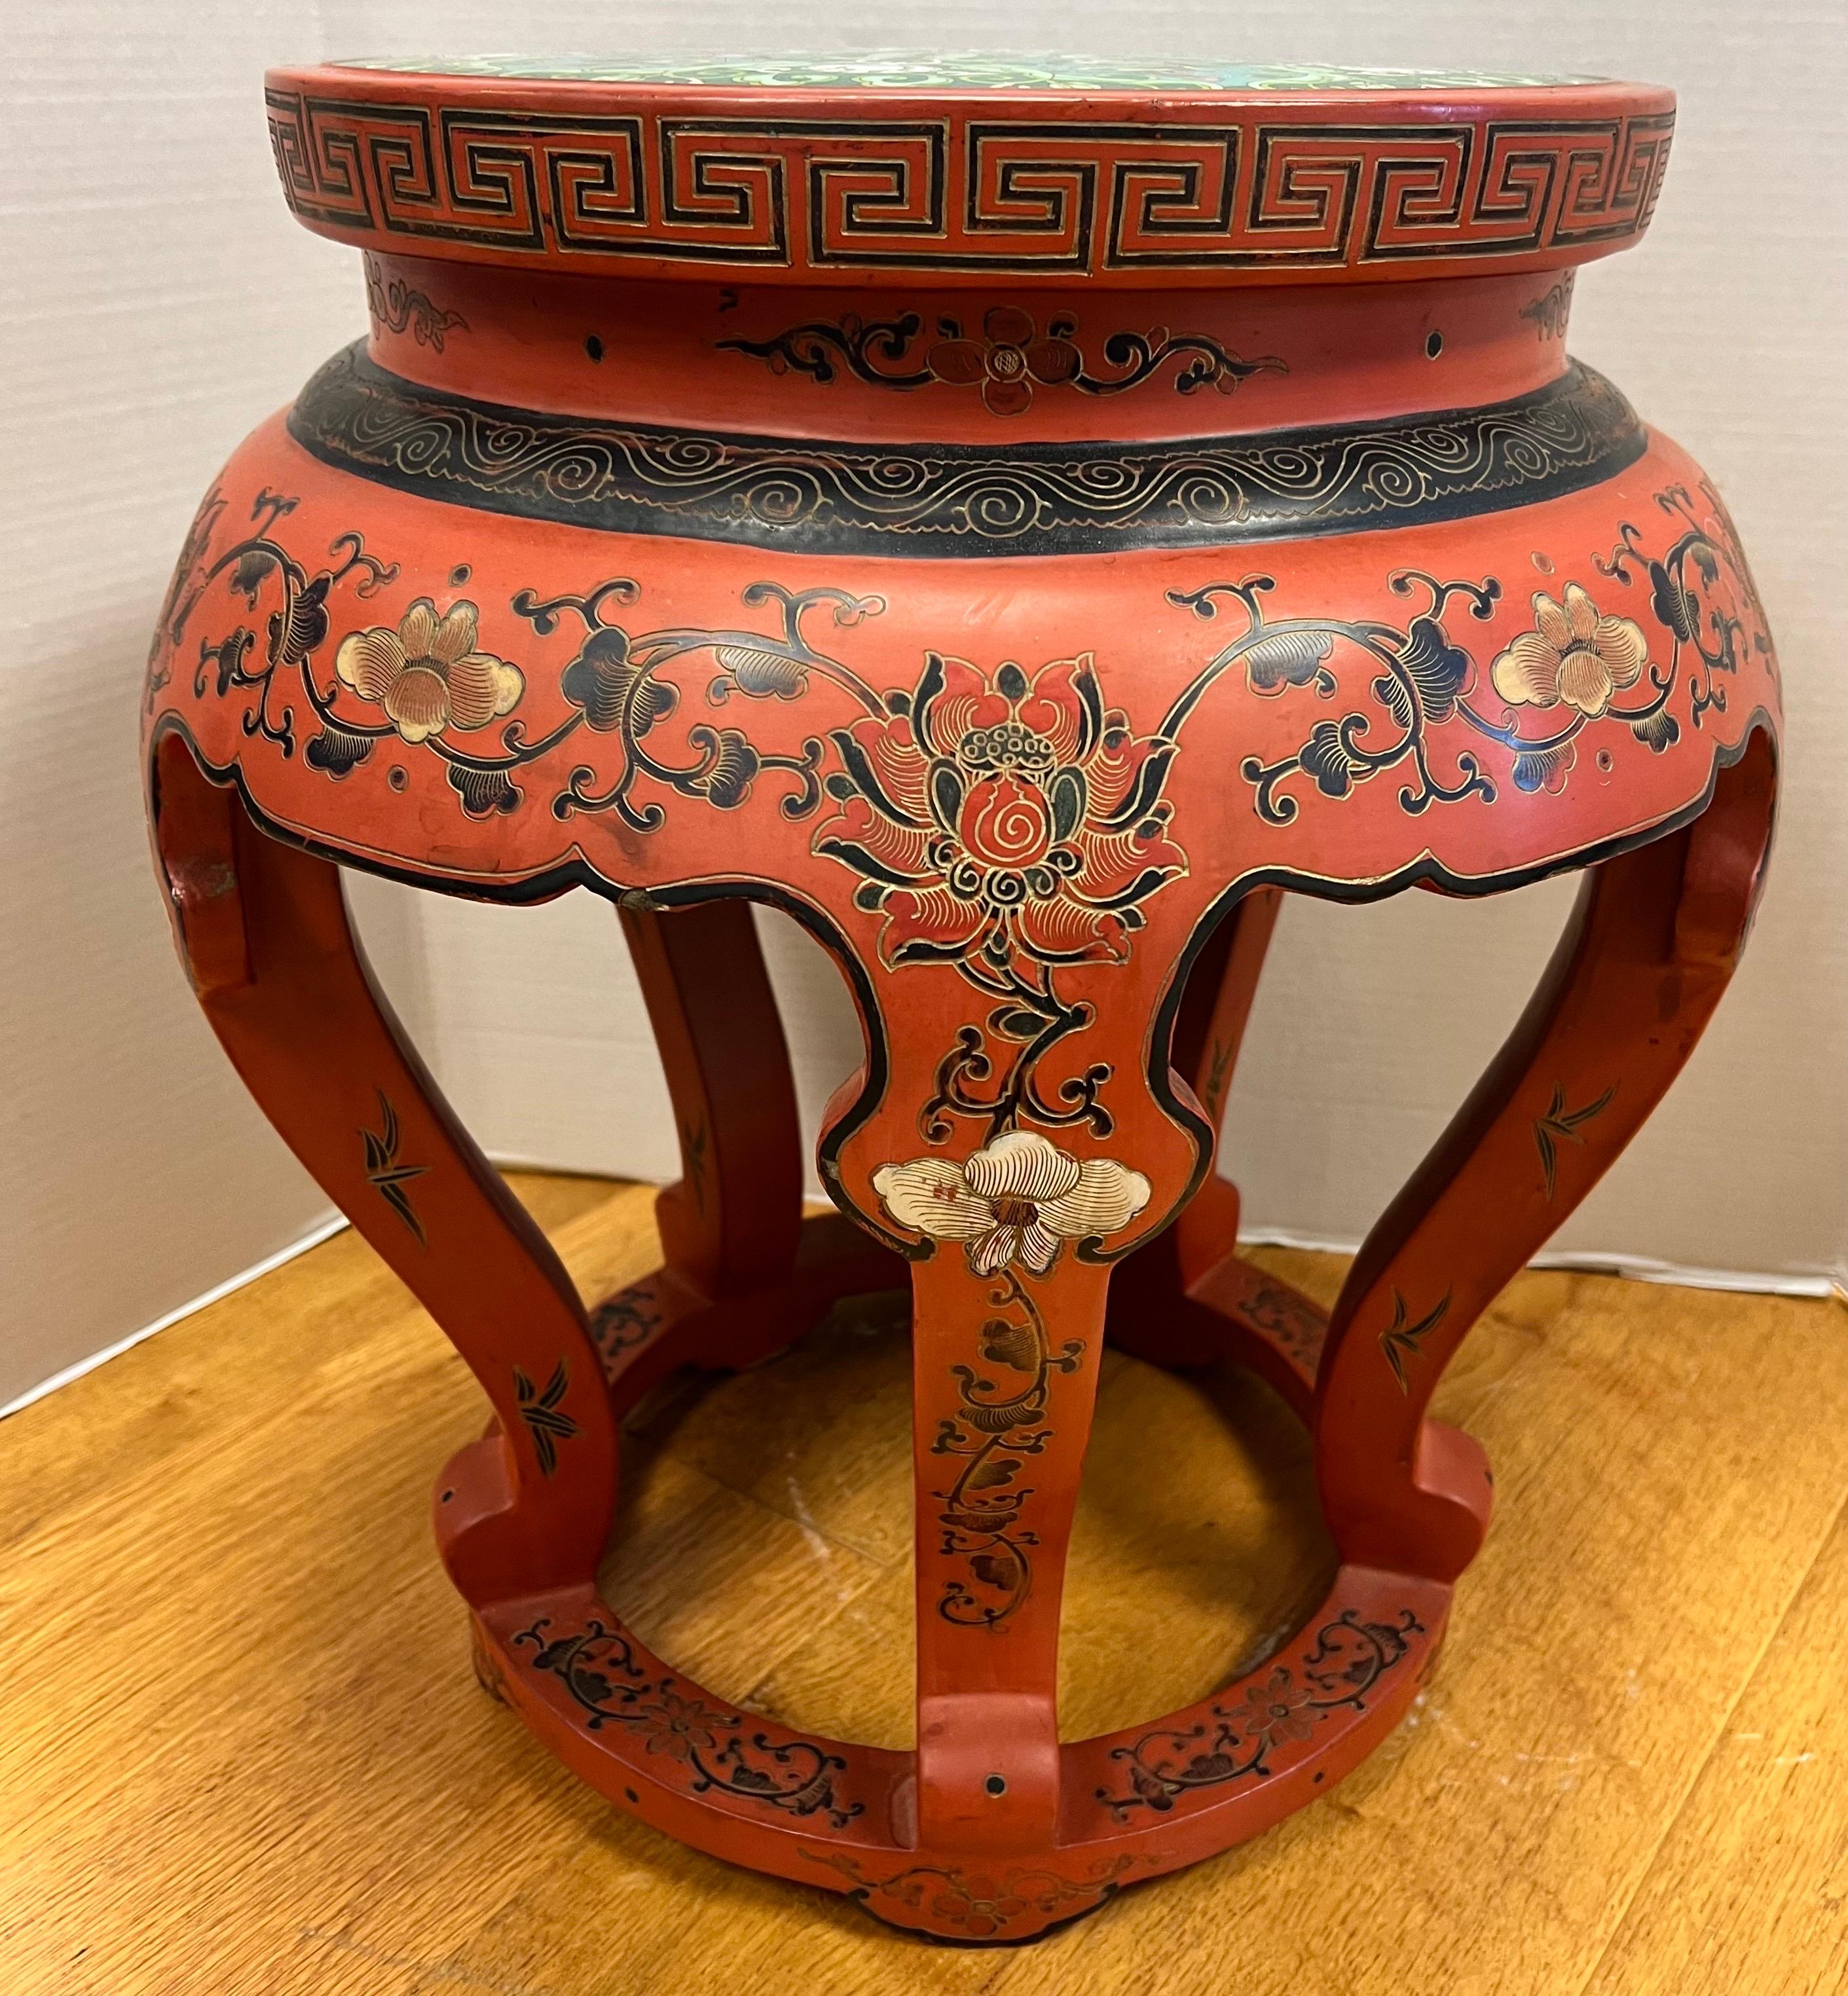 Chinoiserie Chinese Handpainted Painted Red Garden Stool Pedestal with Cloisonne Top